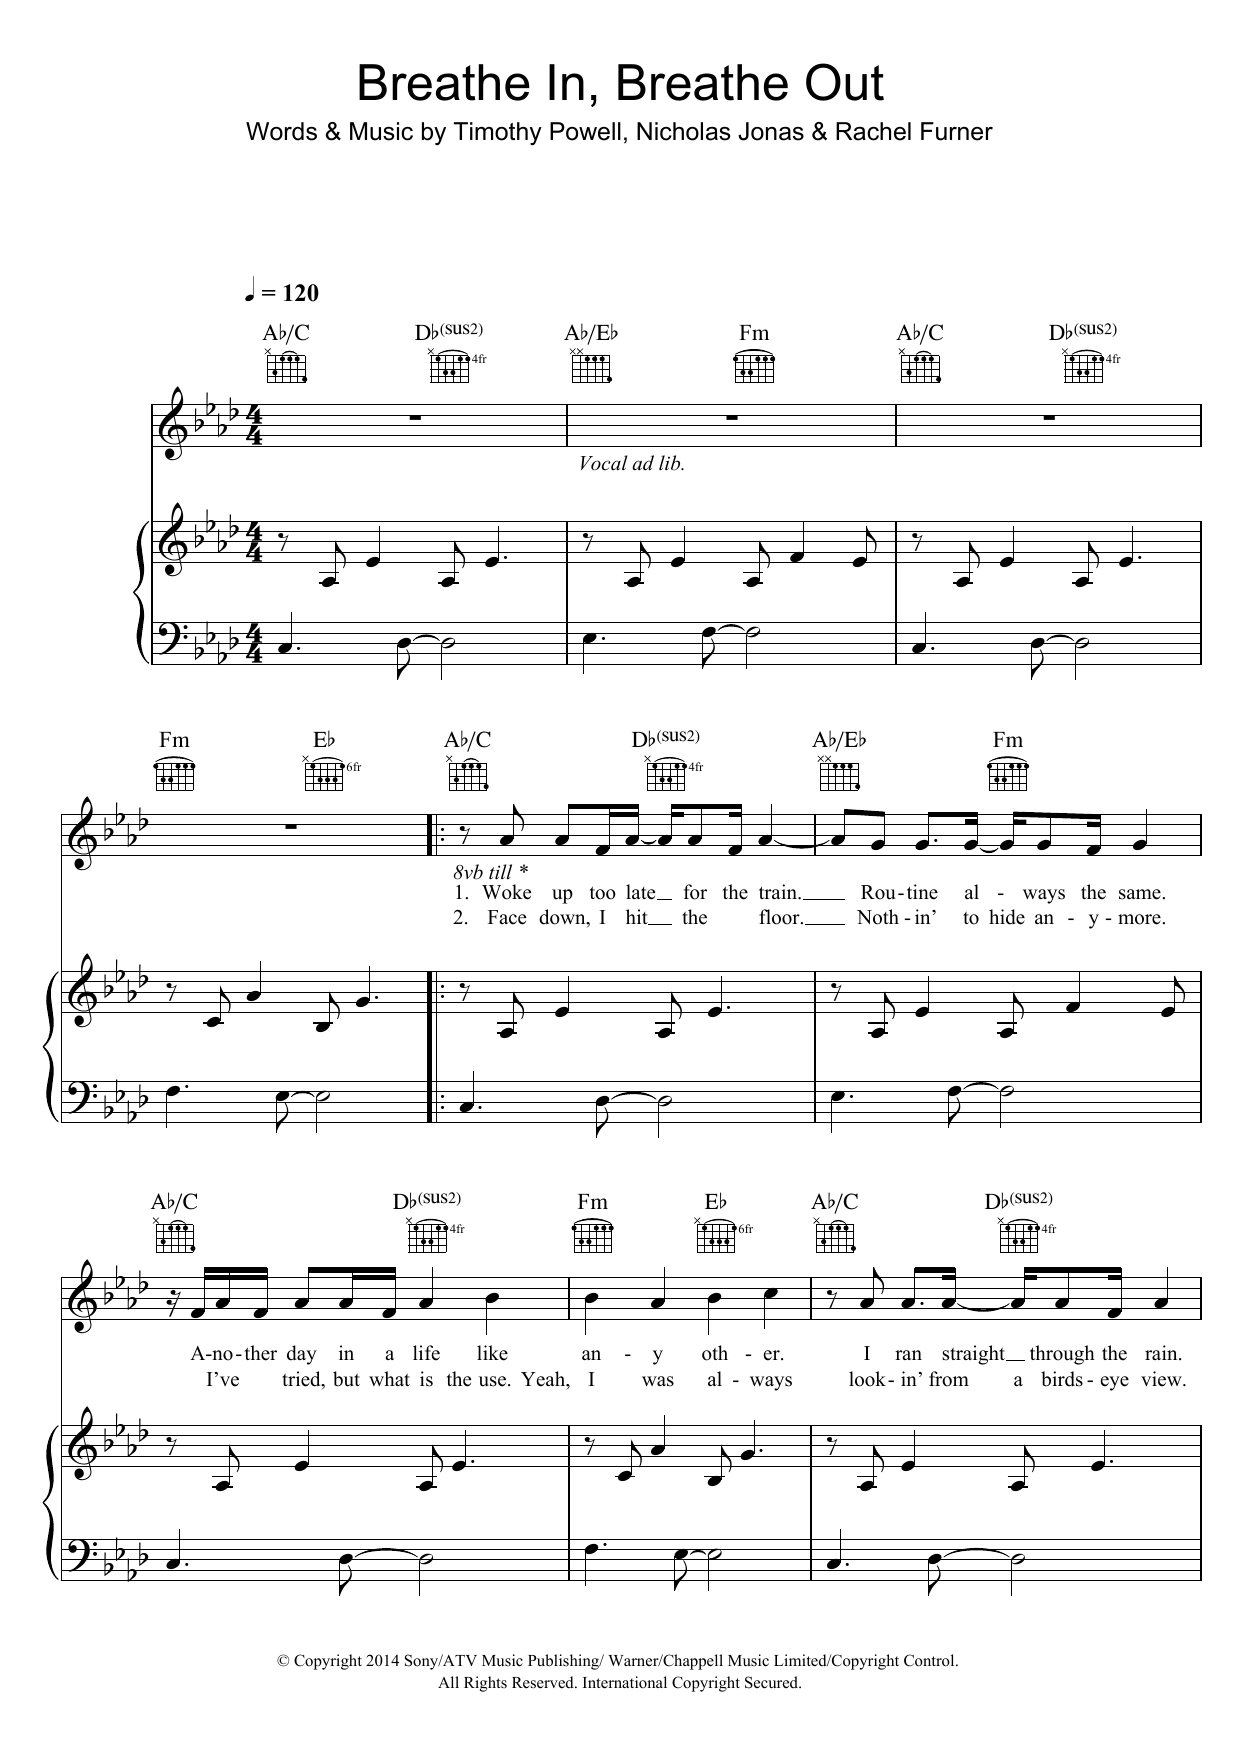 Download Tich Breathe In, Breathe Out Sheet Music